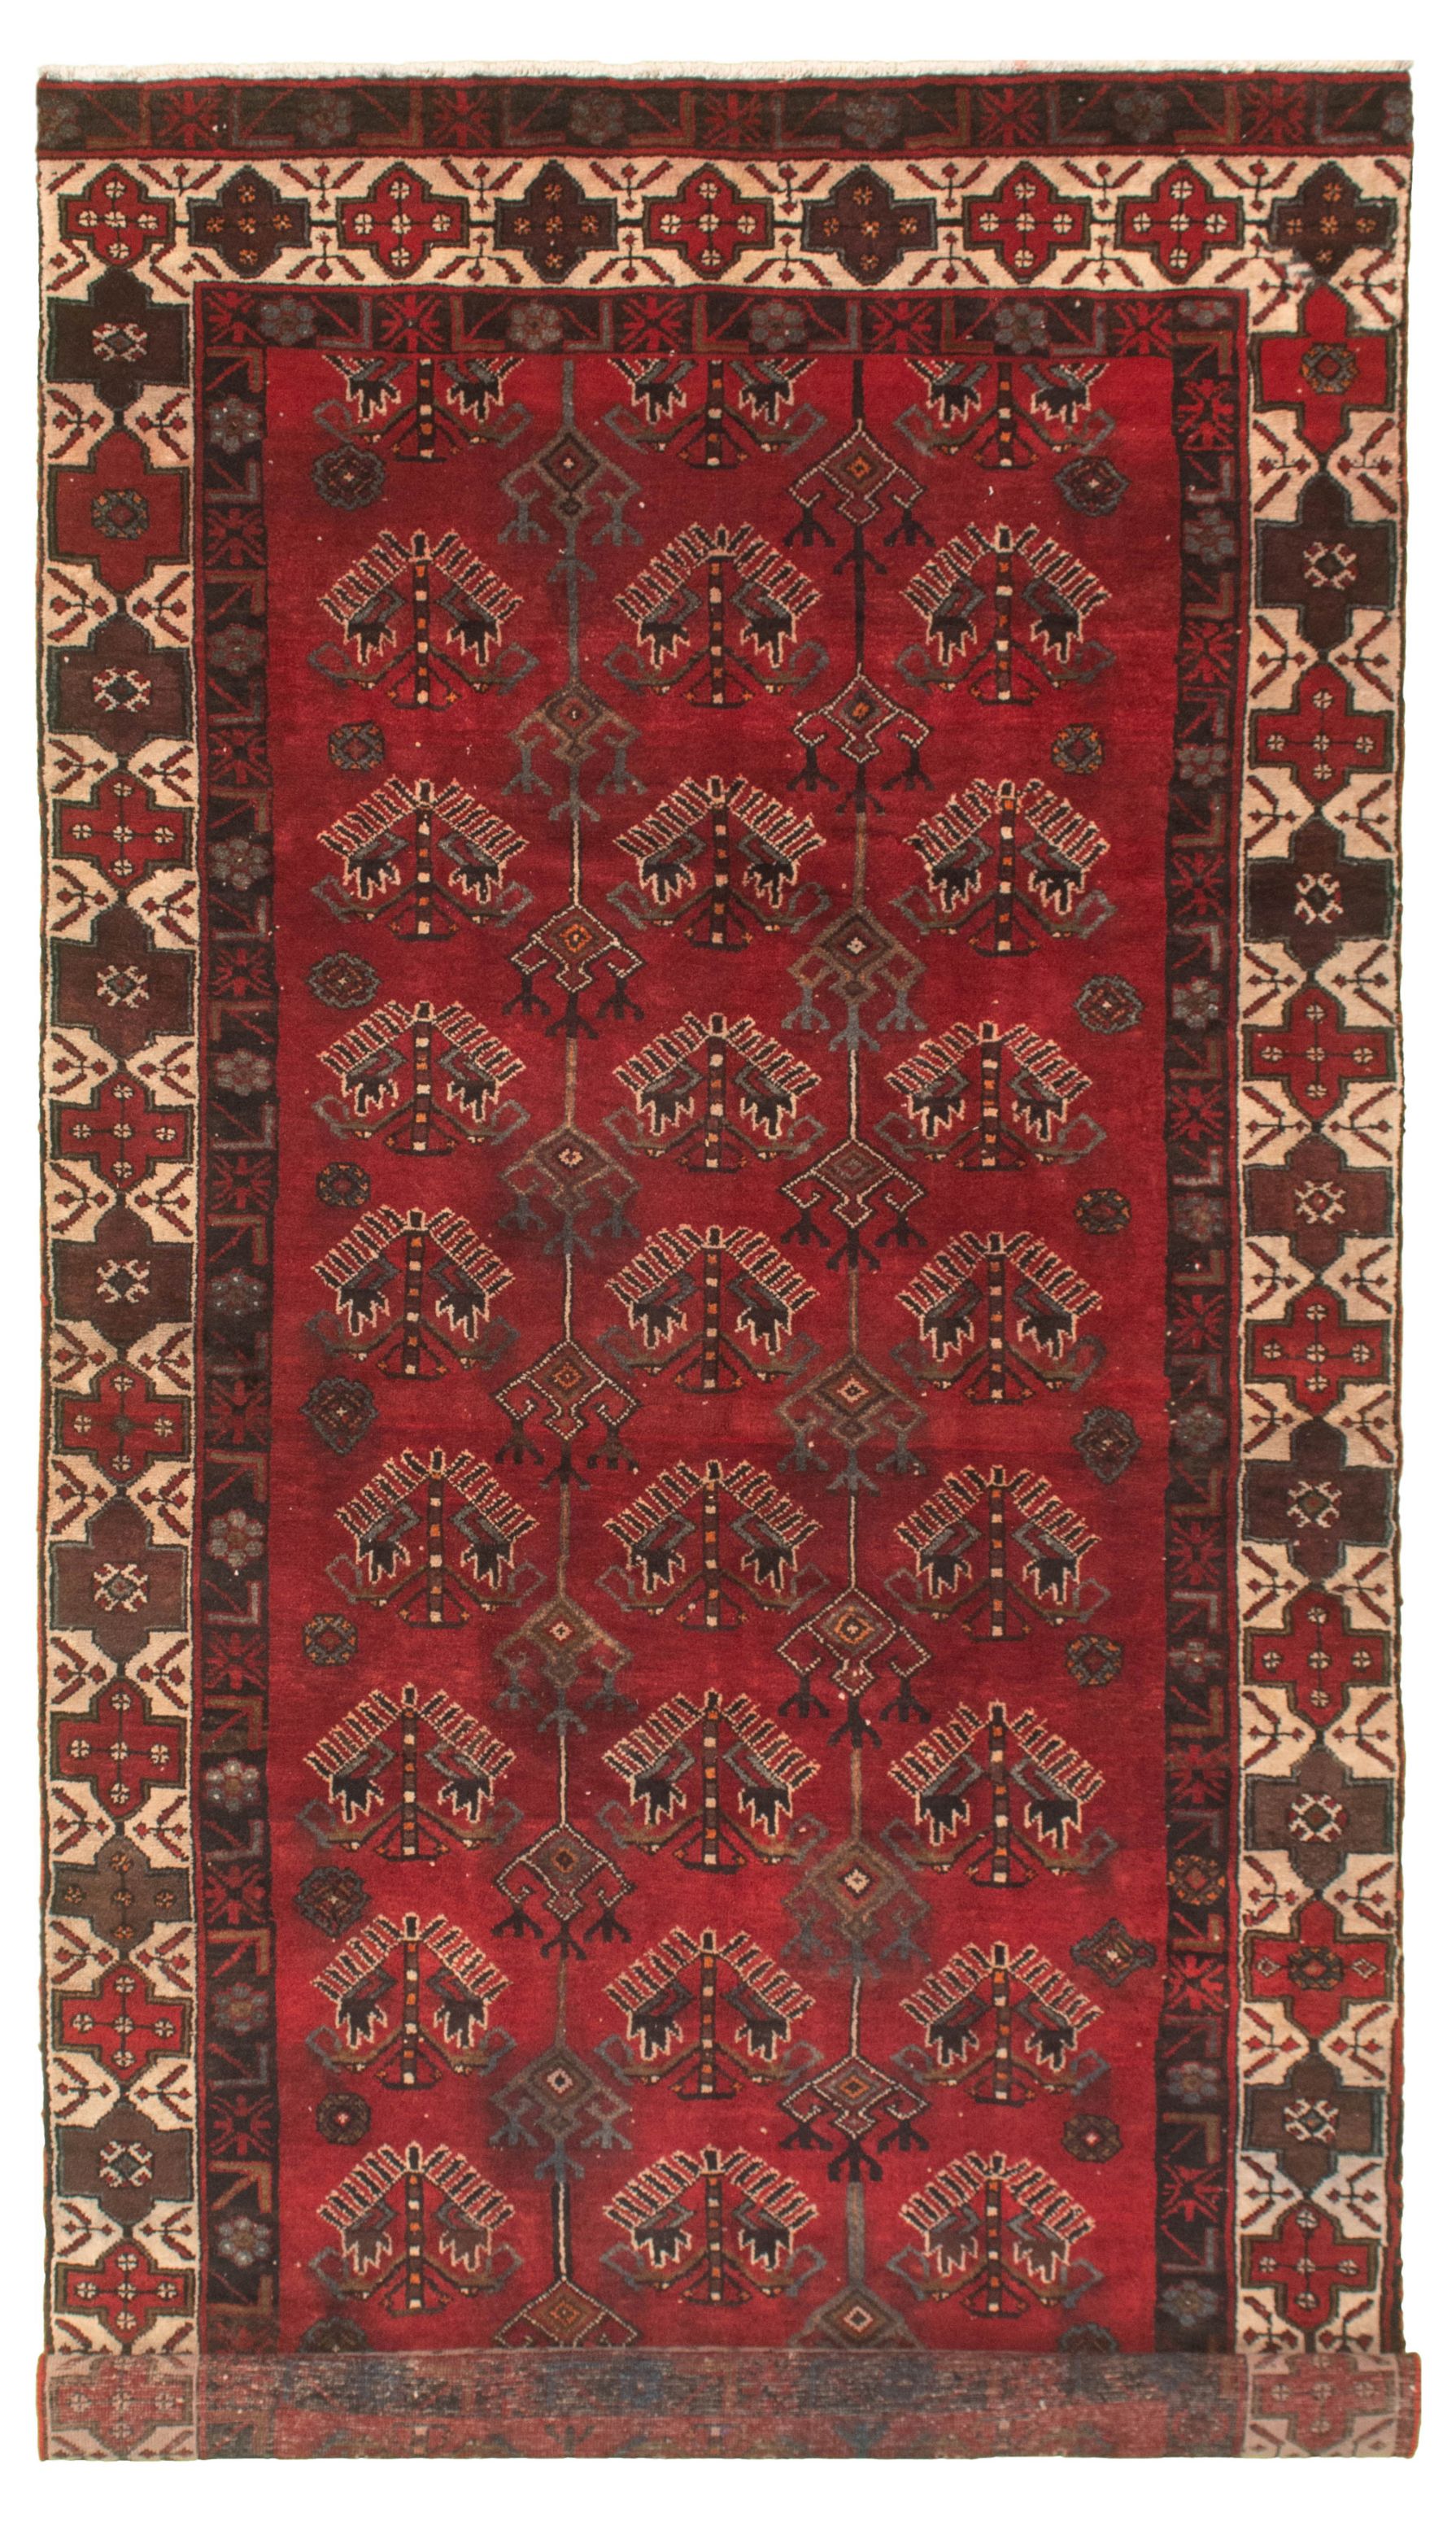 Hand-knotted Authentic Turkish Red Wool Rug 5'1" x 10'4" Size: 5'1" x 10'4"  